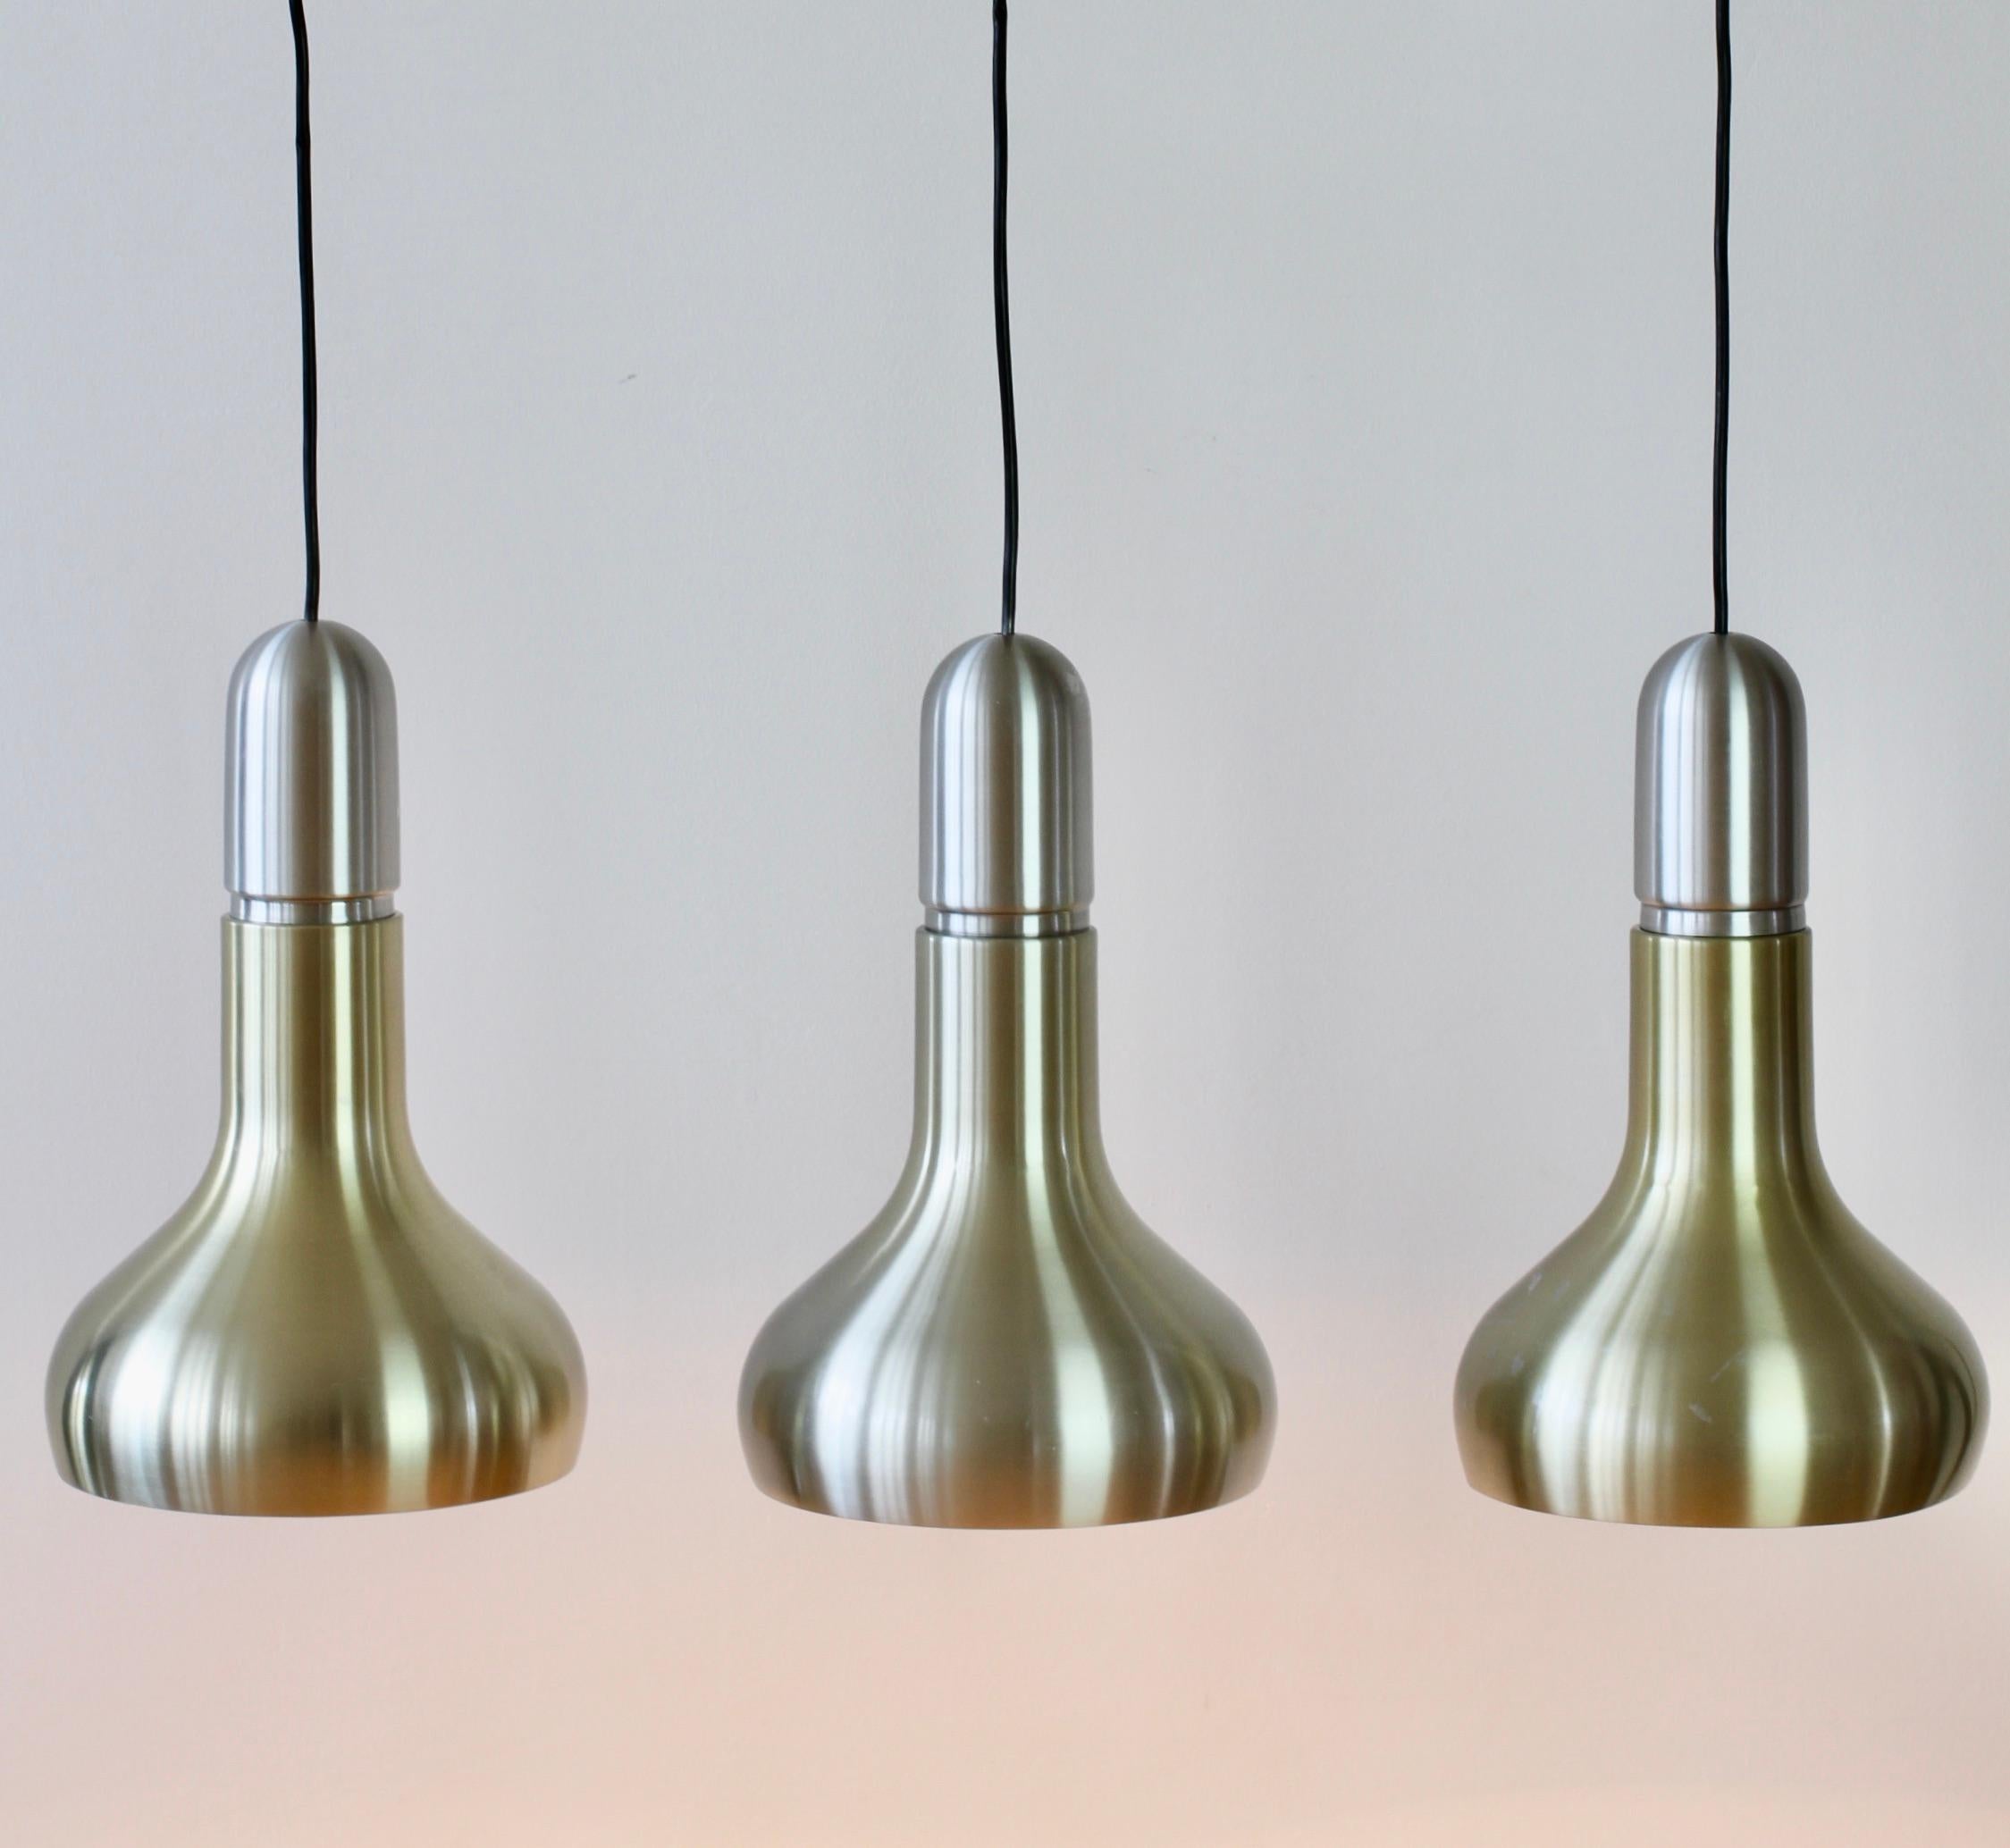 Anodized Staff Leuchten Set / Trio of 'Brass' Hanging Pendant Lights / Lamps, circa 1970s For Sale